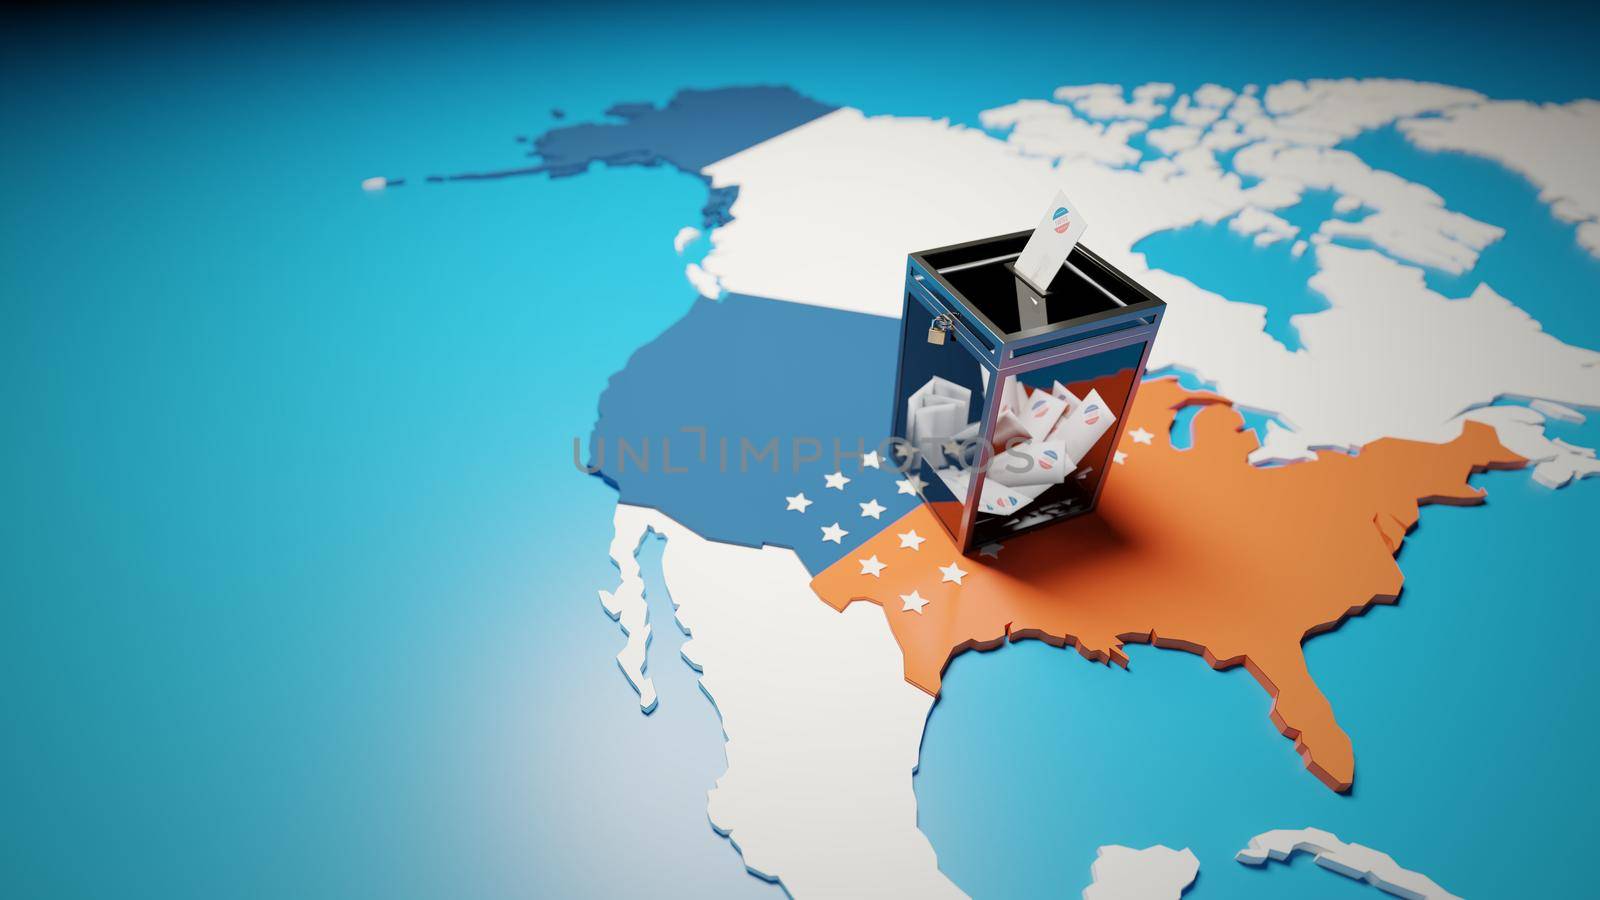 US elections, ballot box with voting envelope over a map of USA. Abstract concept background with negative space. Digital 3D render. by hernan_hyper